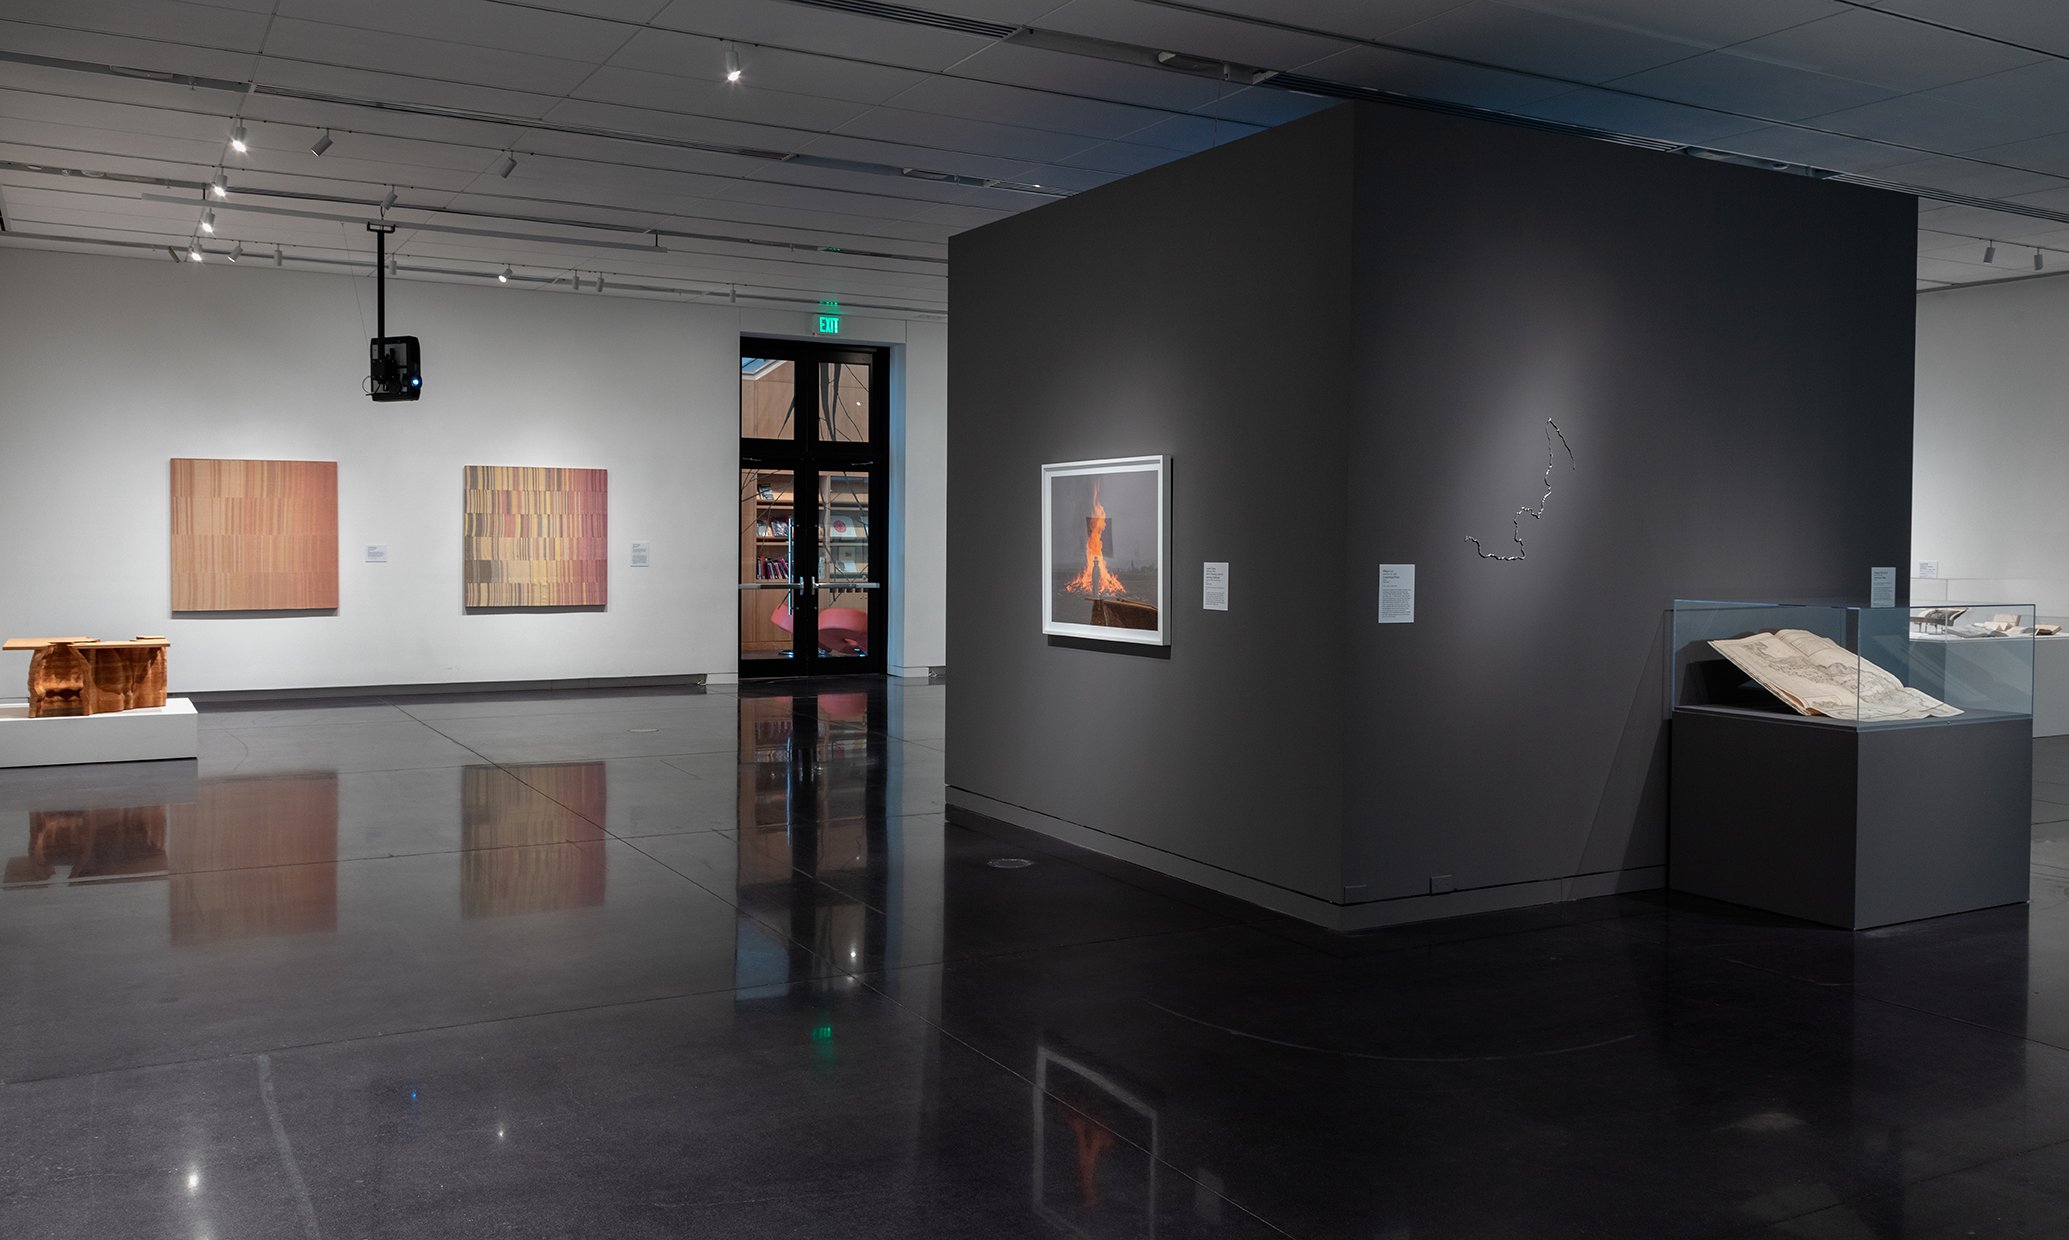  “Documenting Change:  Our Climate Past, Present, Future,” at CU Art Museum, University of Colorado Boulder, 2019.  Curated by Hope Saska and Erin Espelie.       